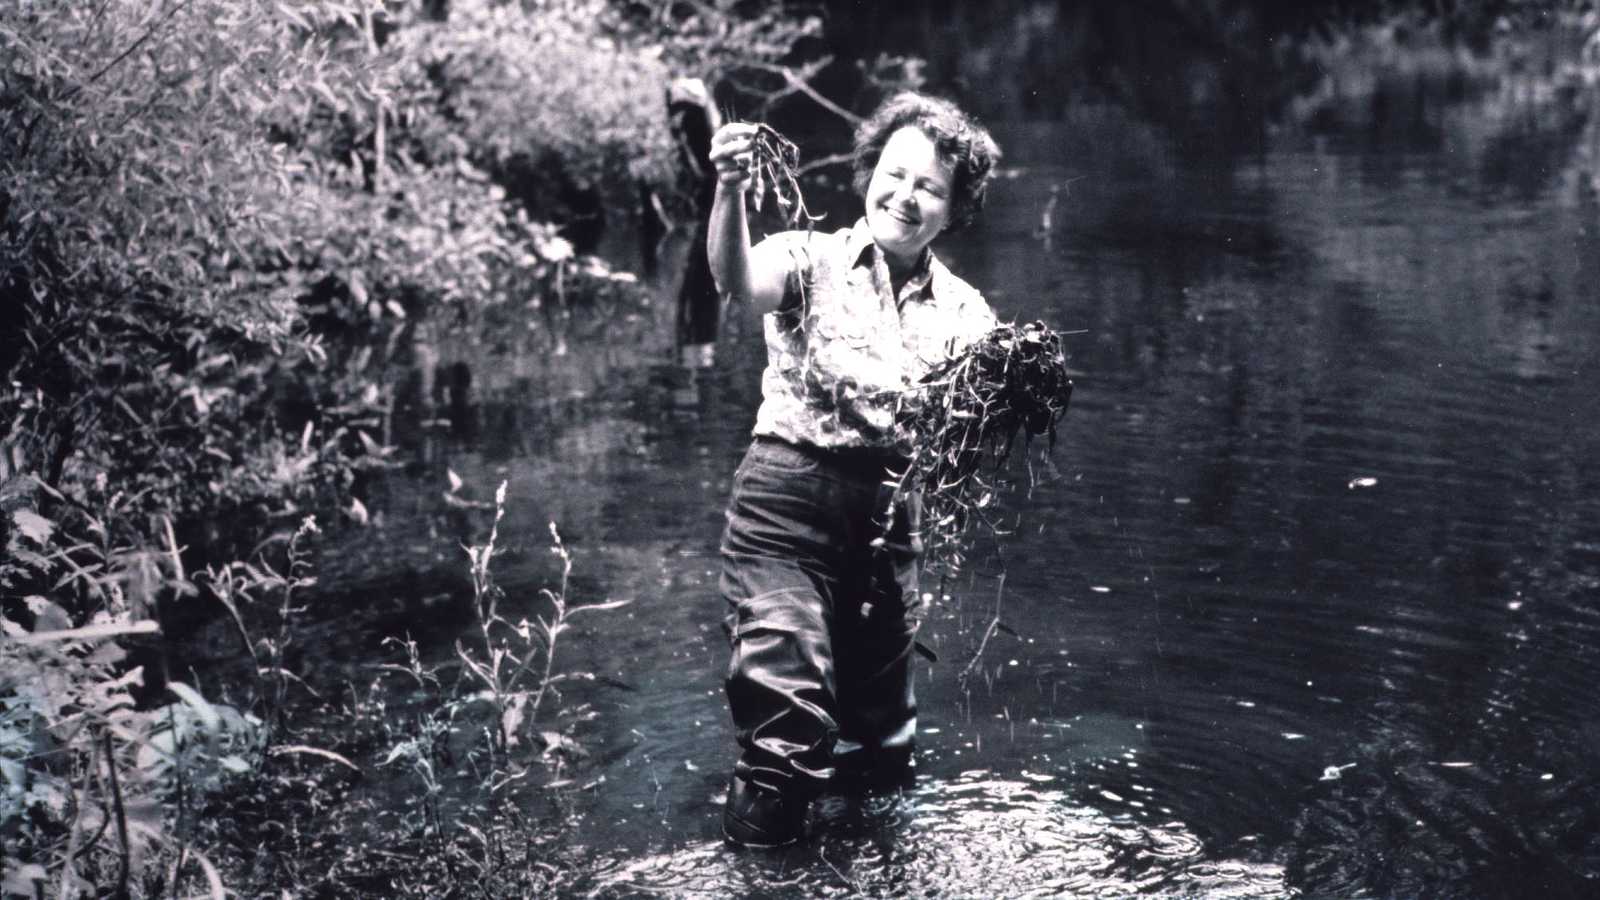 Ruth Patrick wading in a stream.